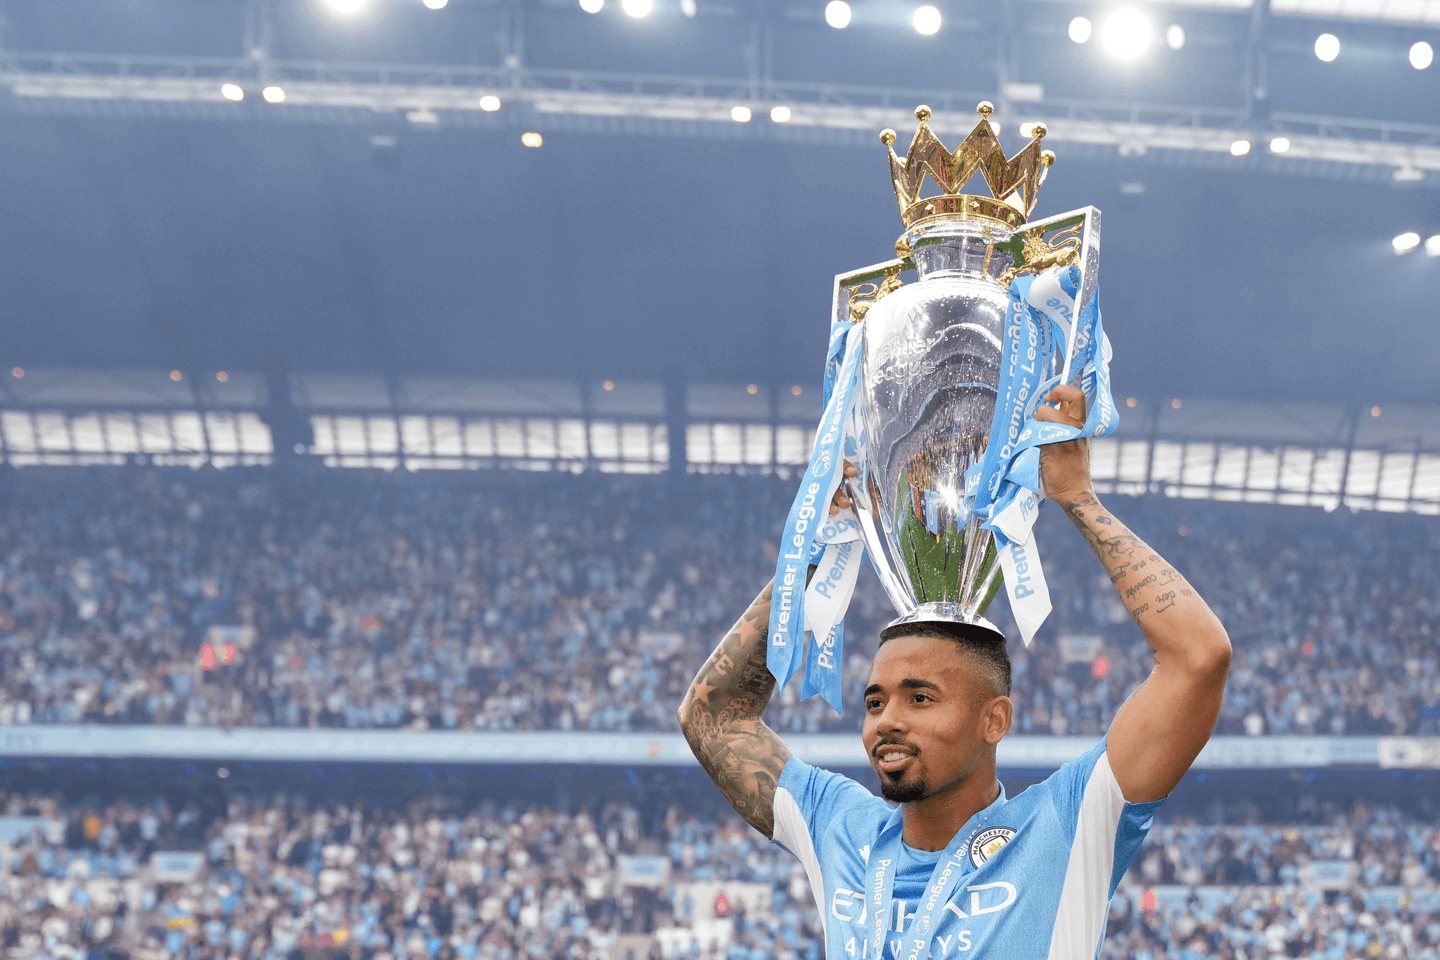 Premier League 2022/23: Arsenal's new £45m signing Gabriel Jesus out to 'win everything', says "I don’t want to be the new Thierry Henry" - Check out